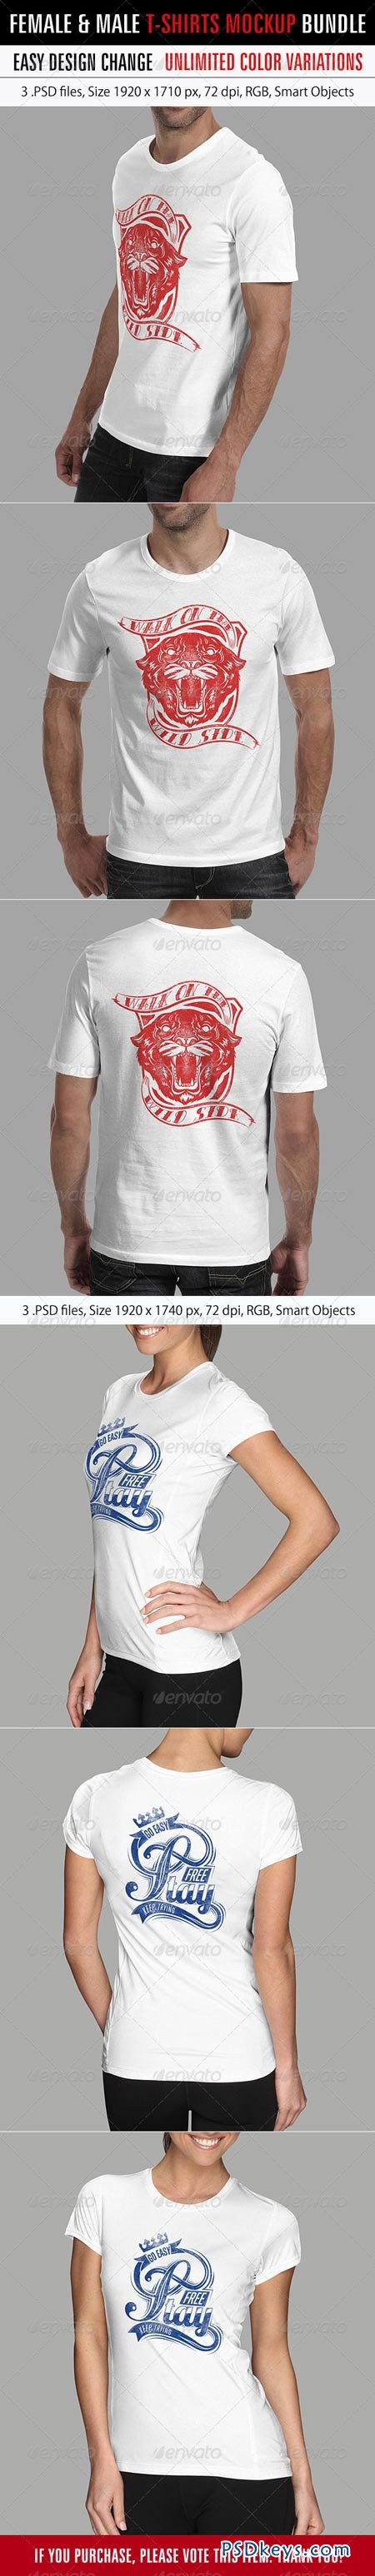 Female and Male T-Shirt Bundle 6526267